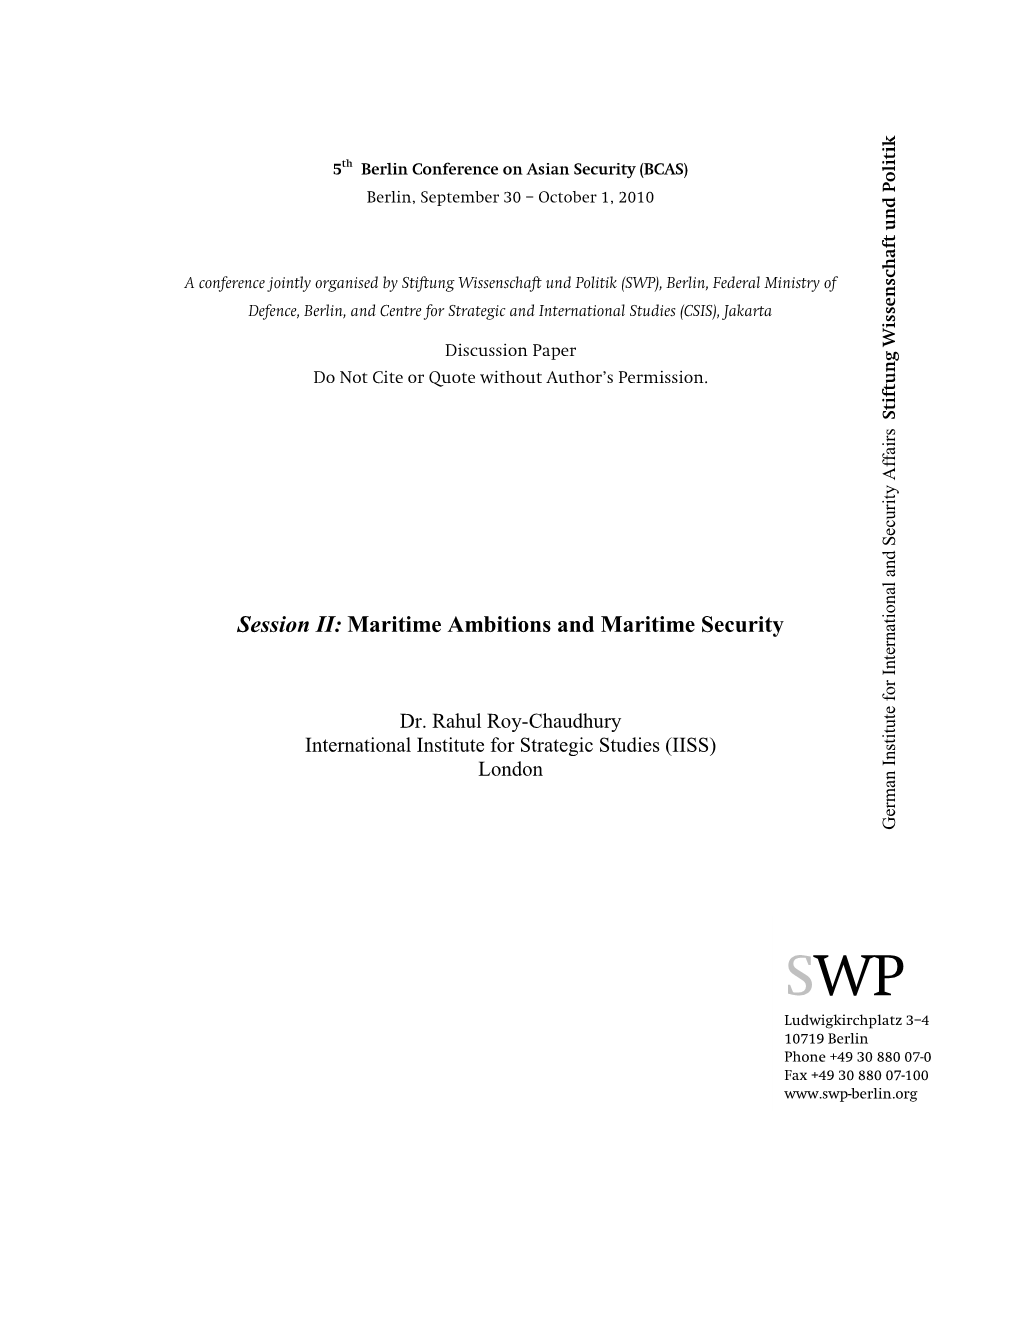 Maritime Ambitions and Maritime Security